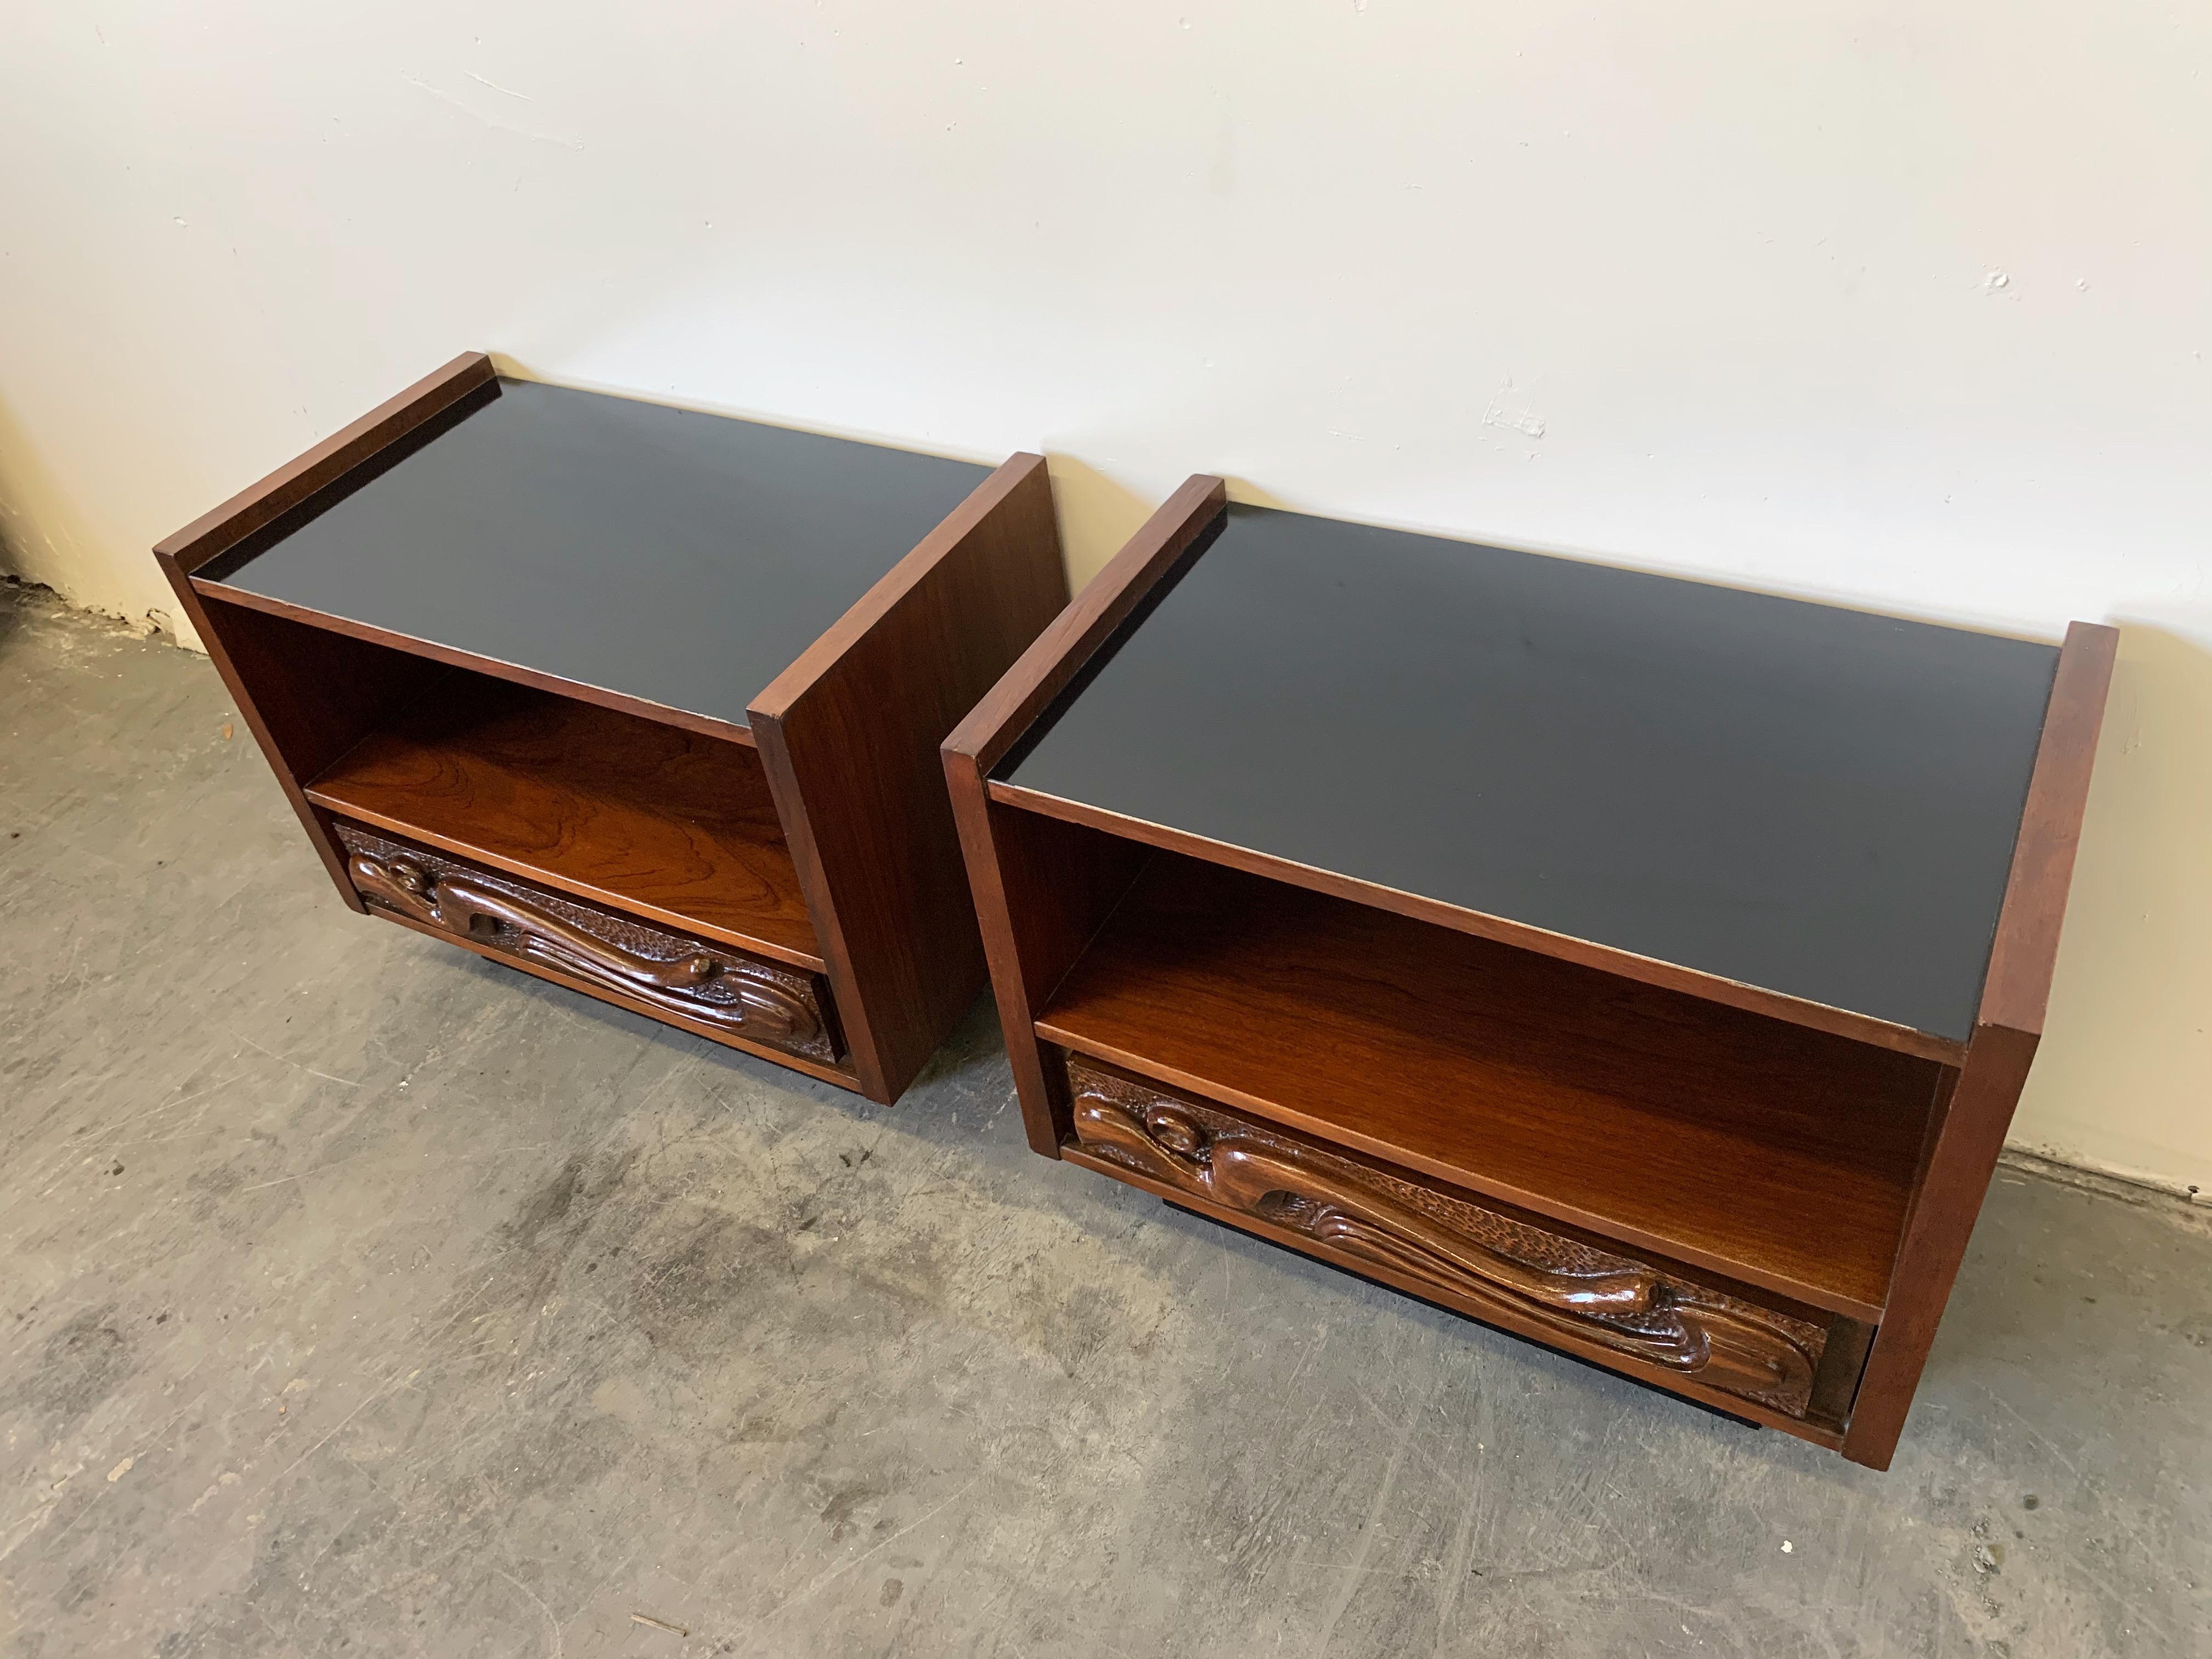 American Pair of Oceanic Sculpted Walnut Nightstands by Pulaski Furniture Co., circa 1969